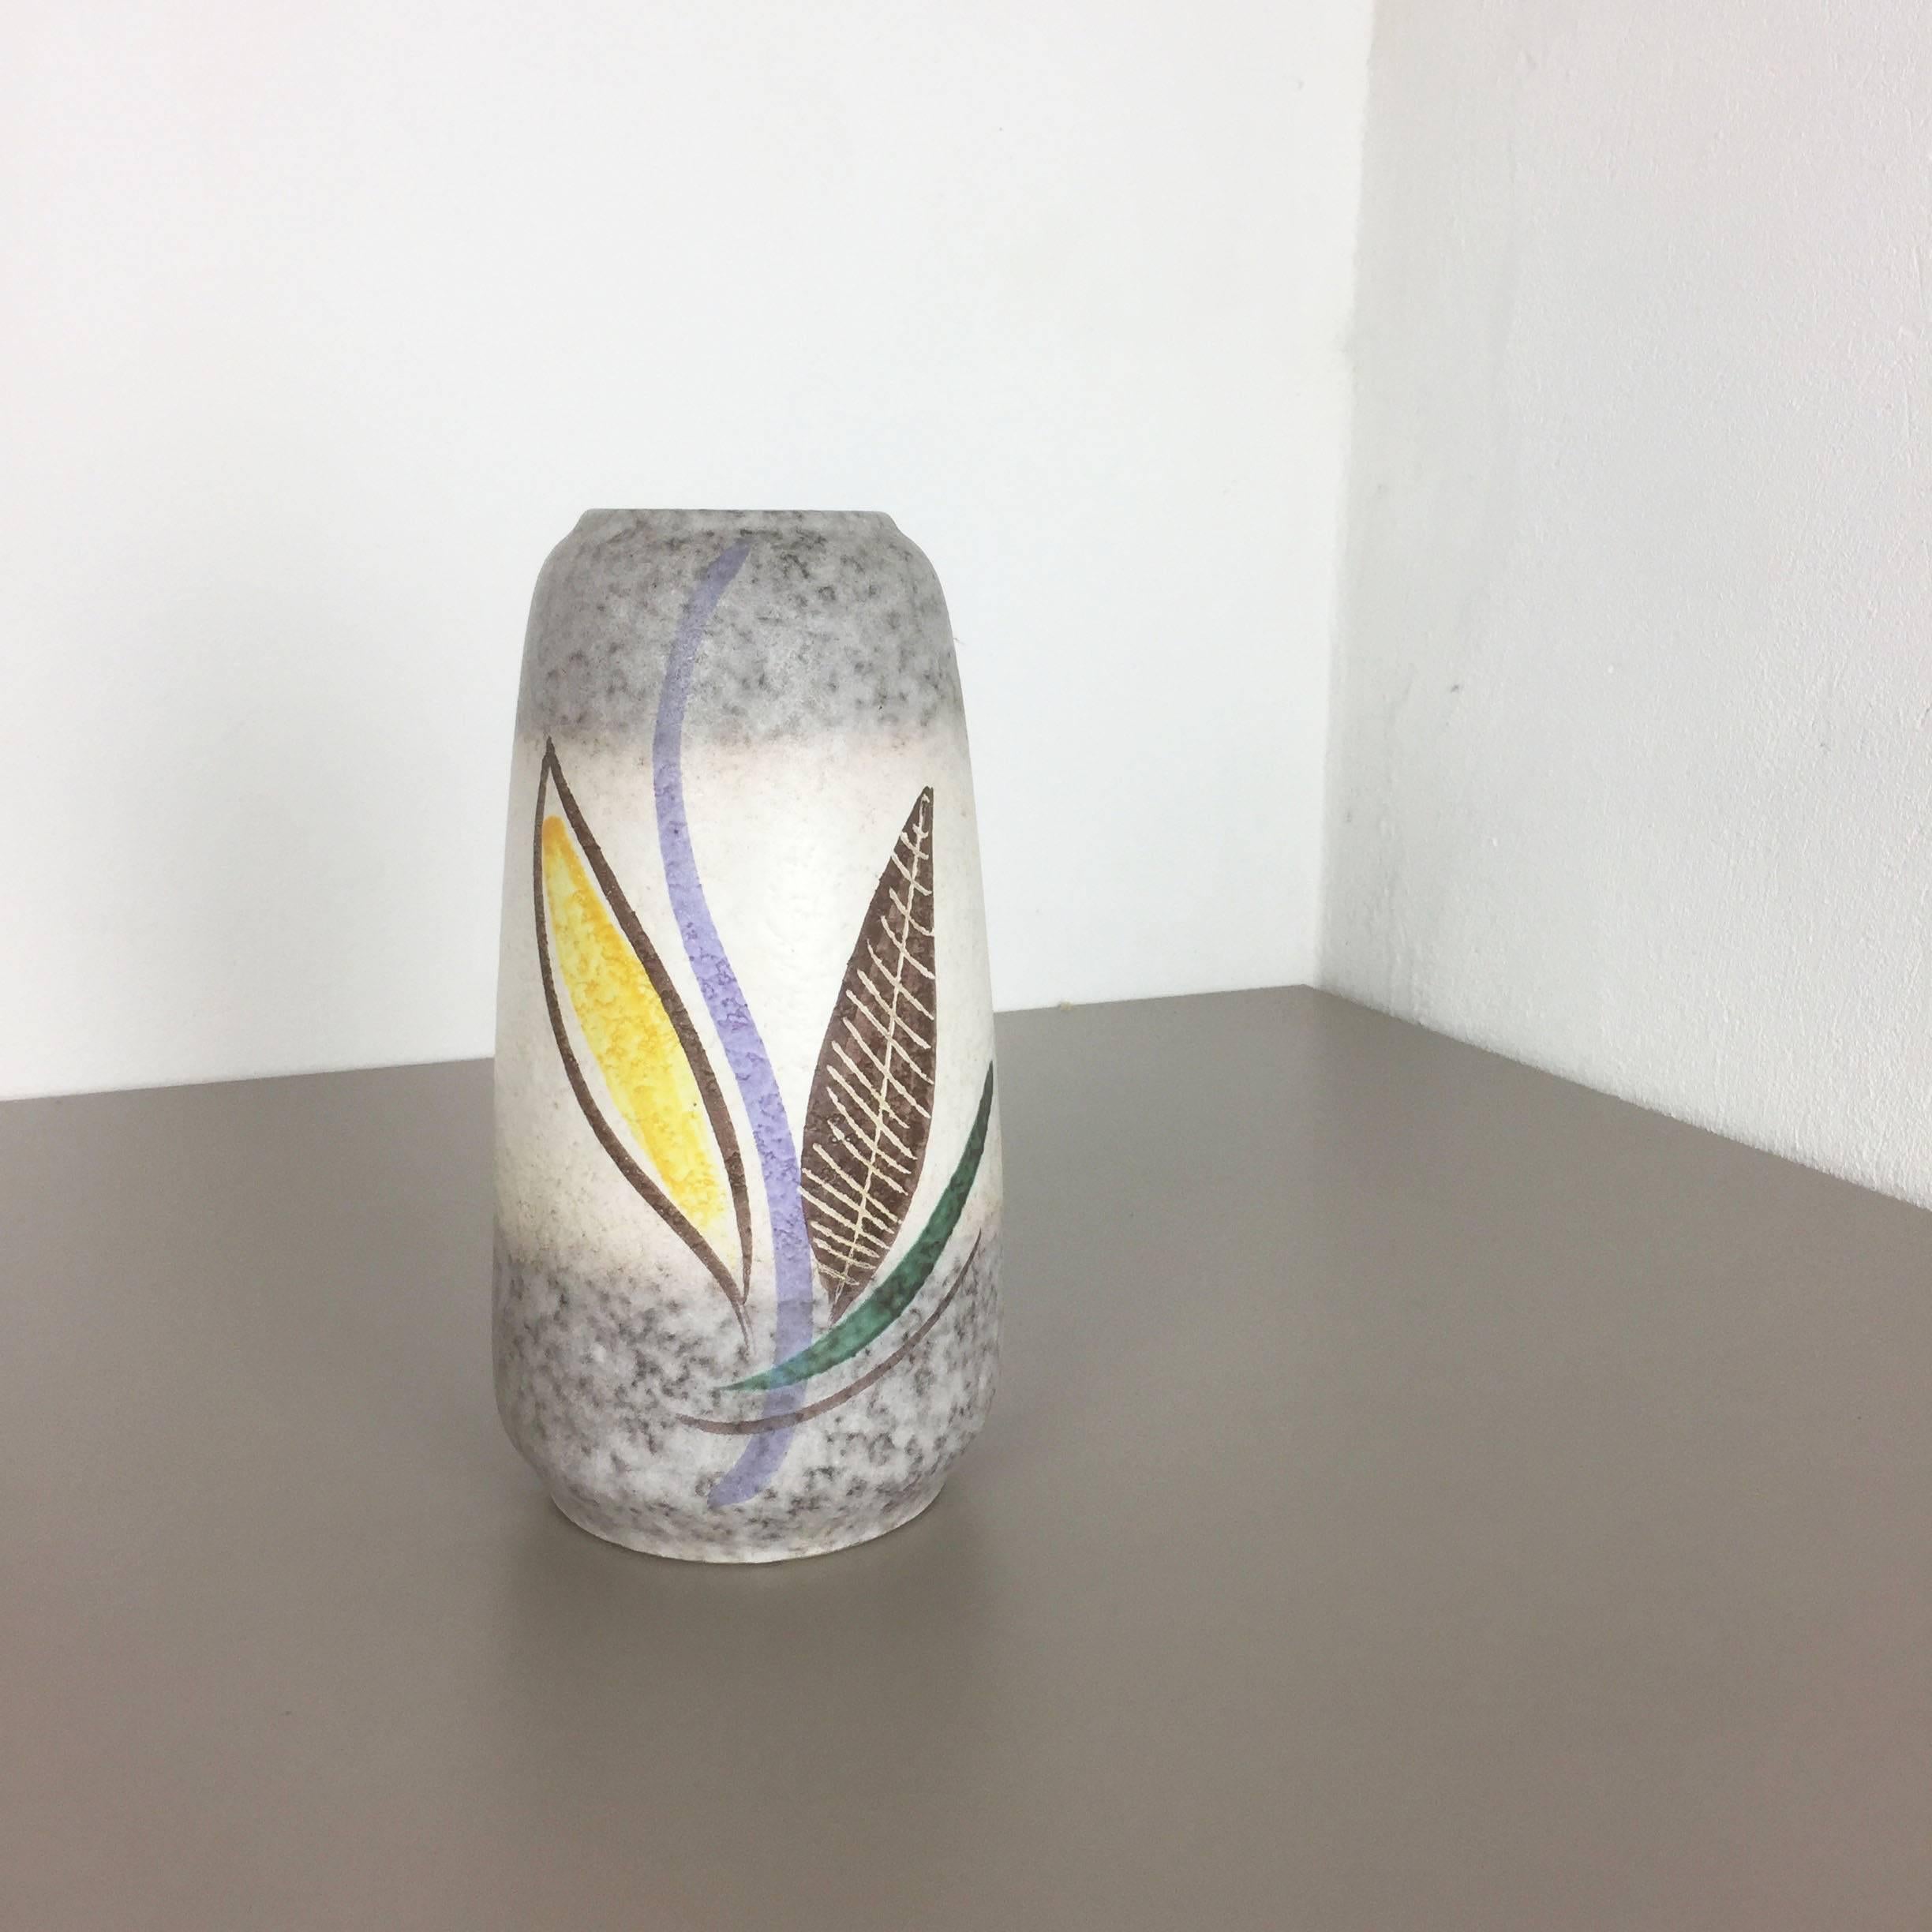 Article:

Pottery ceramic vase


Decade:

1950s


Oriding:

Germany



Original vintage 1950s pottery ceramic vase in Germany. High quality German production with a nice abstract flower painting. 
This item remains in a very good